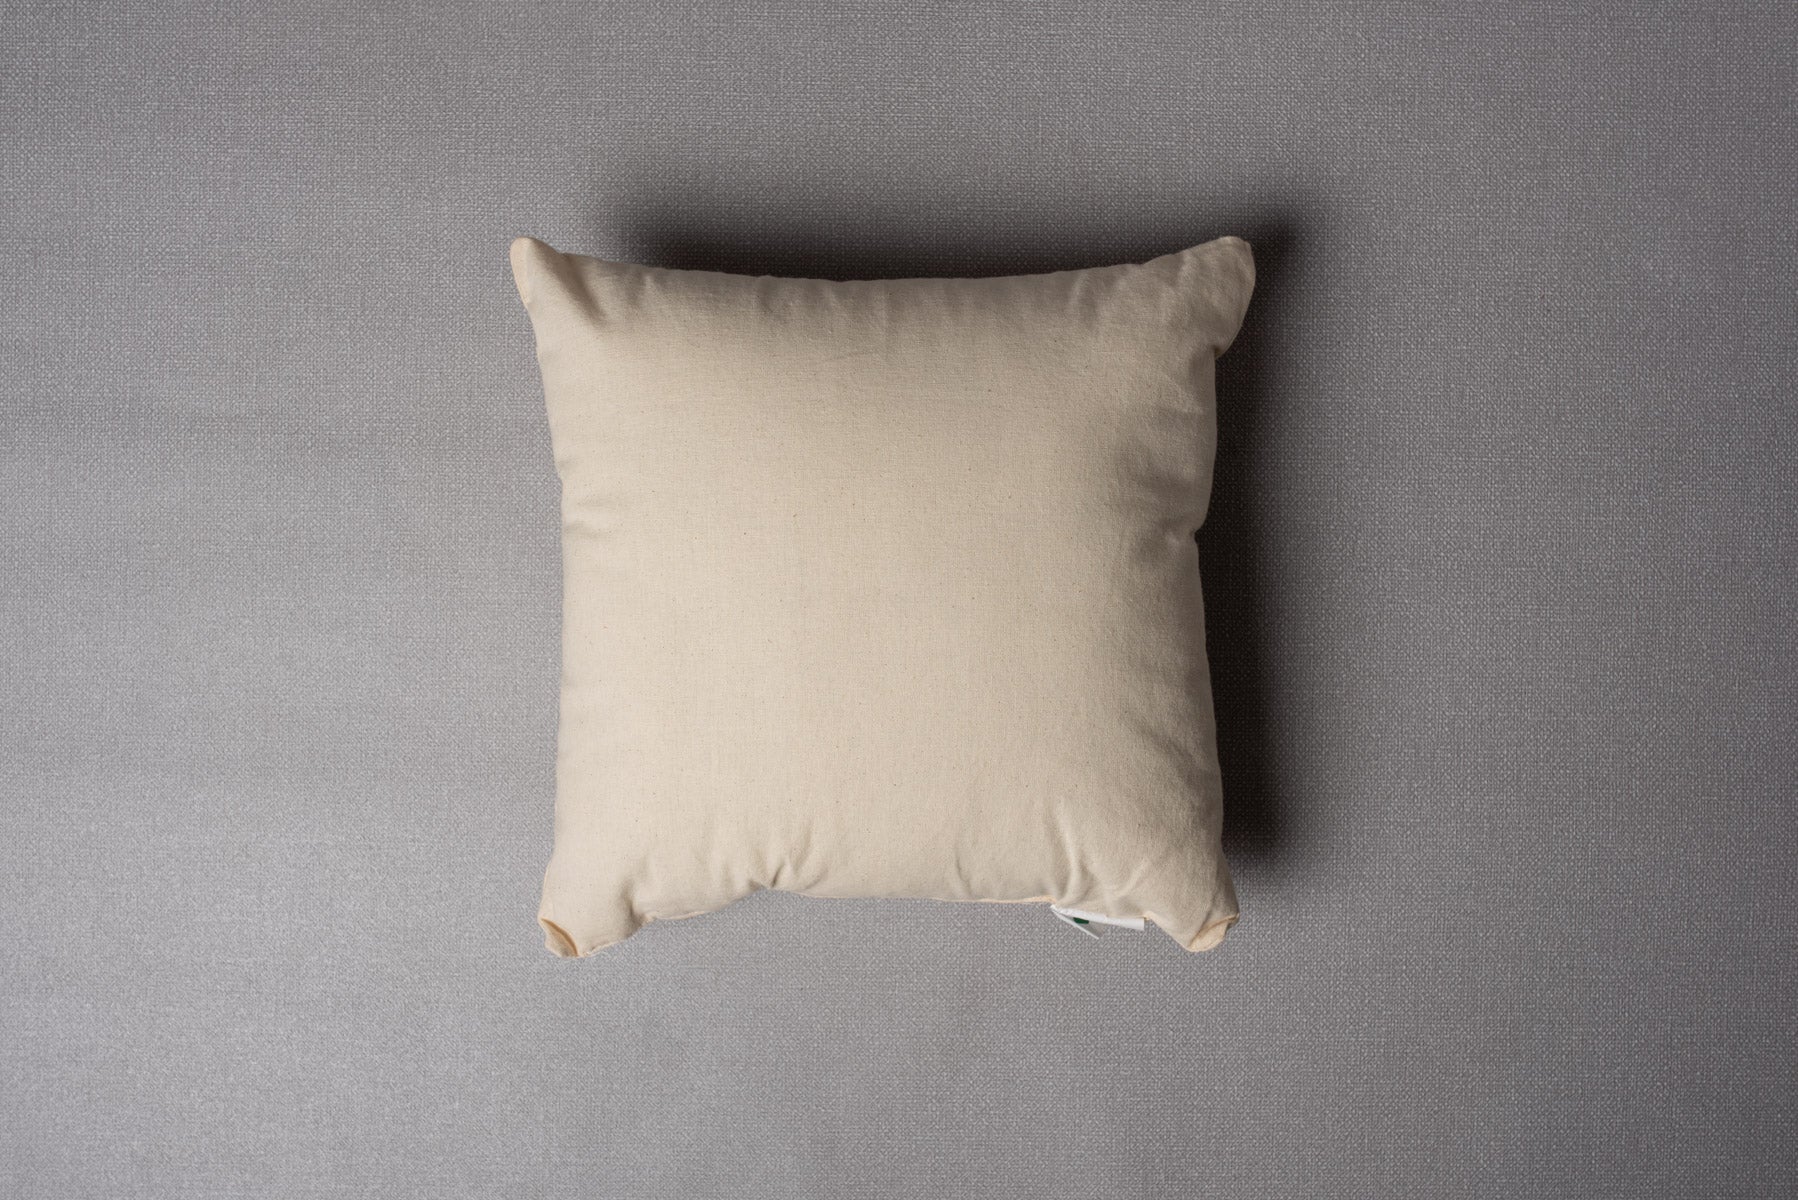 Cushion Filler with Man Made Fiber Filling &amp; Cotton Cover - 12"